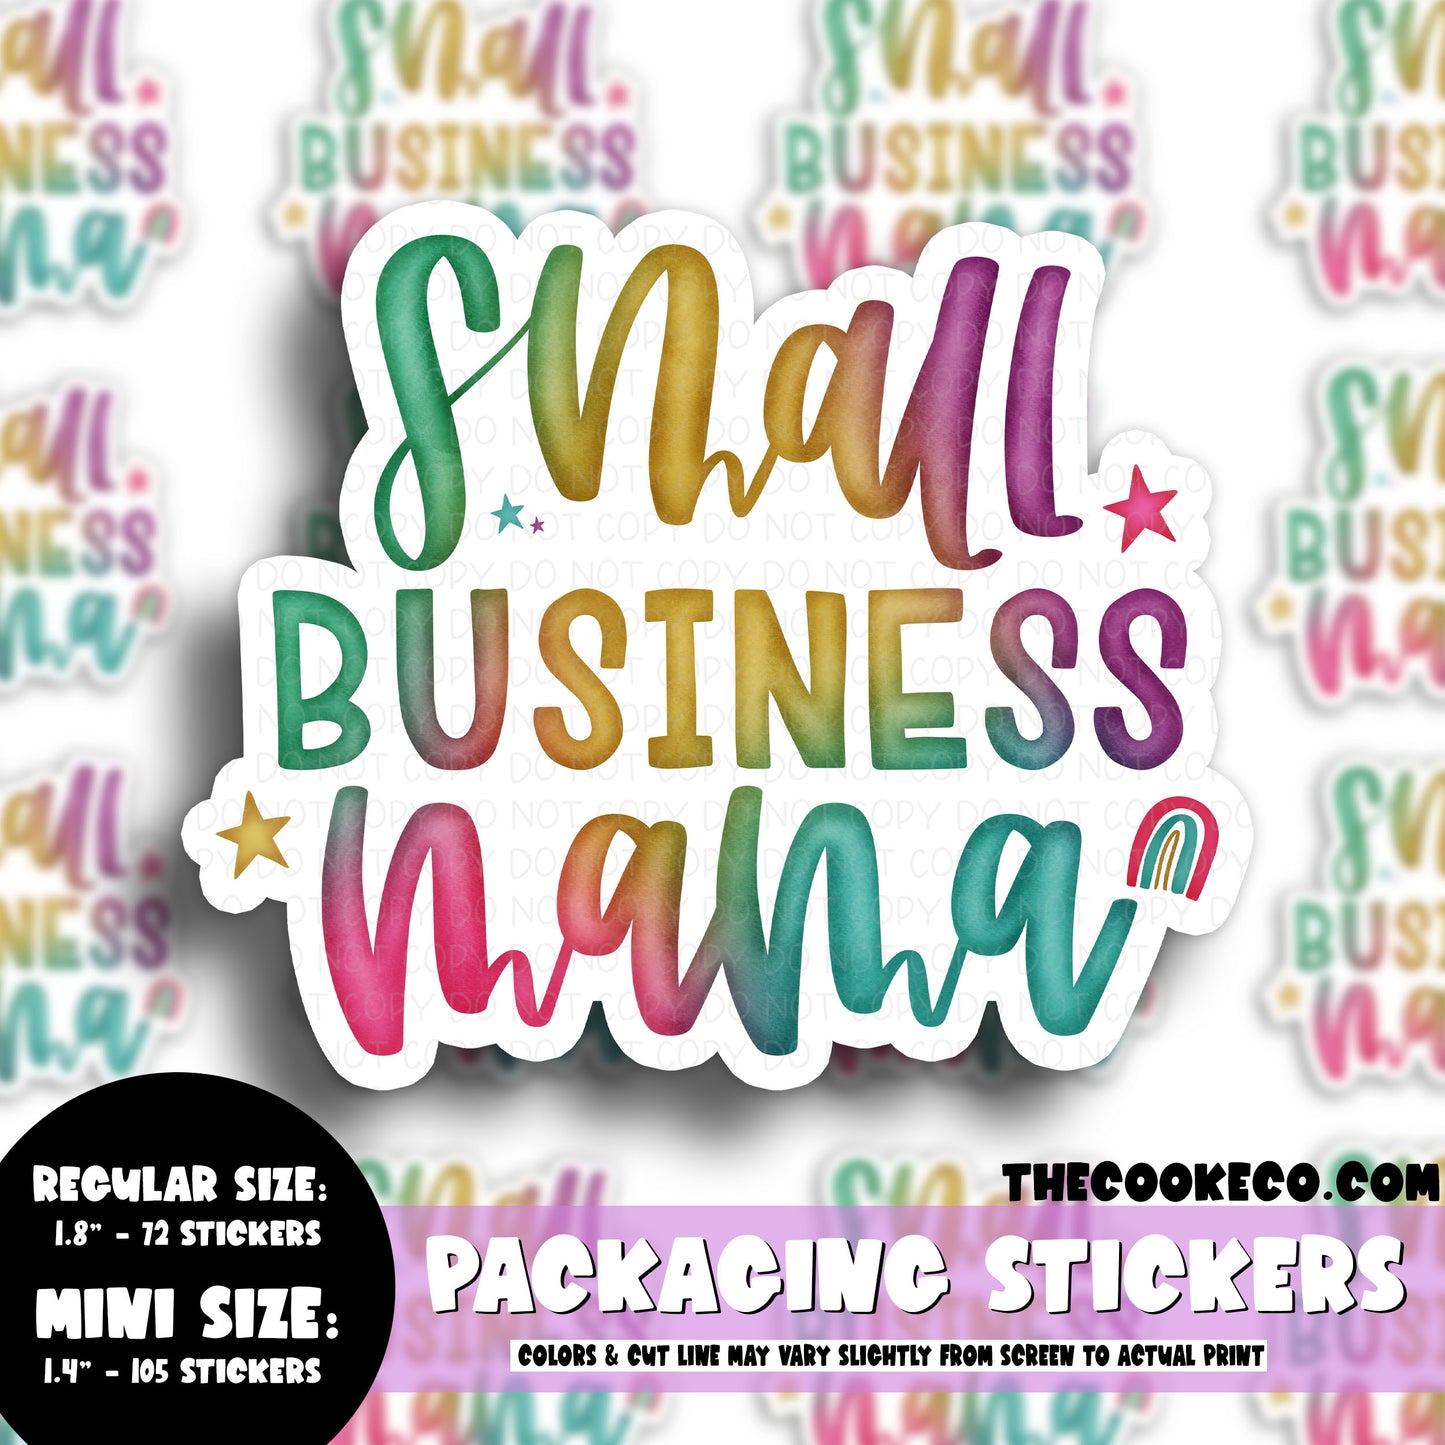 PTO Packaging Stickers | #C0772 - SMALL BUSINESS MAMA